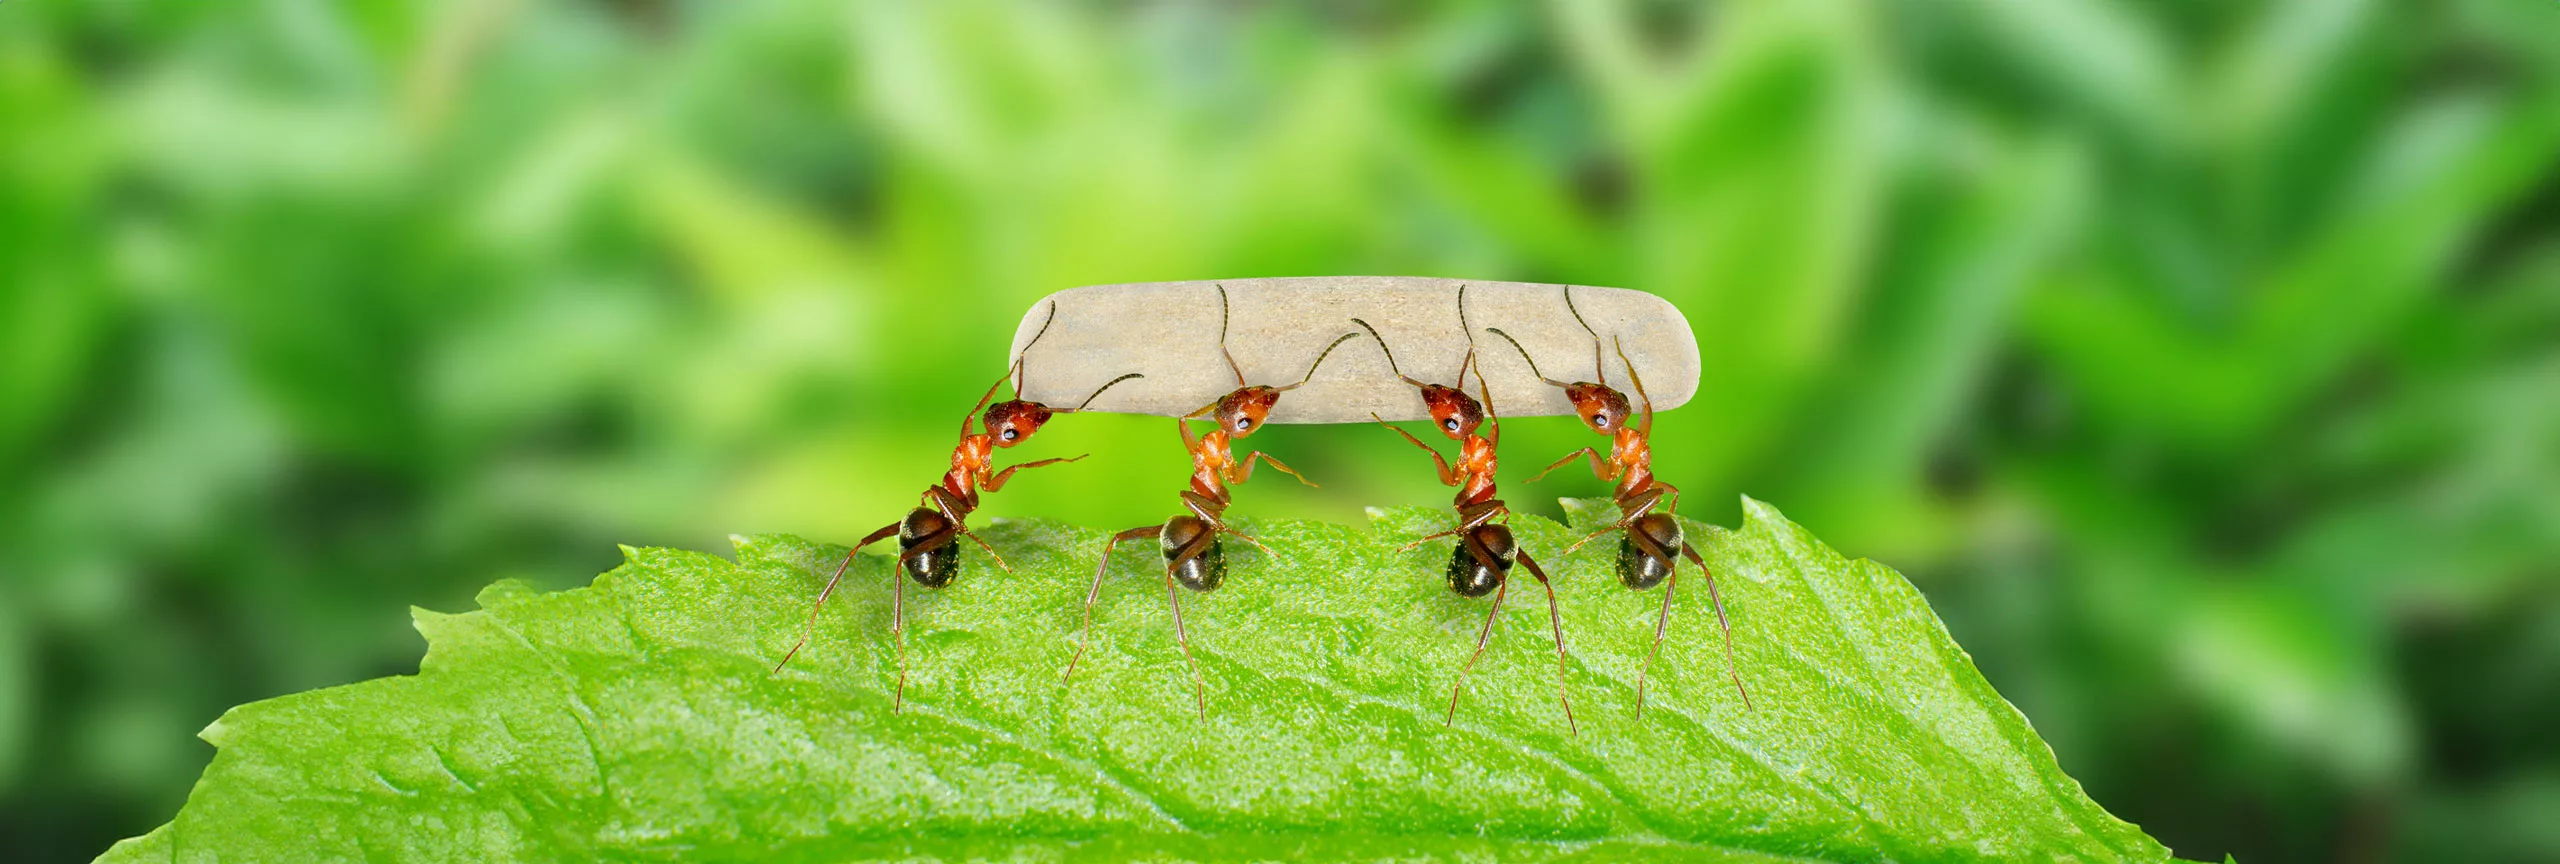 Ants,Unity,And,Cooperation,Working